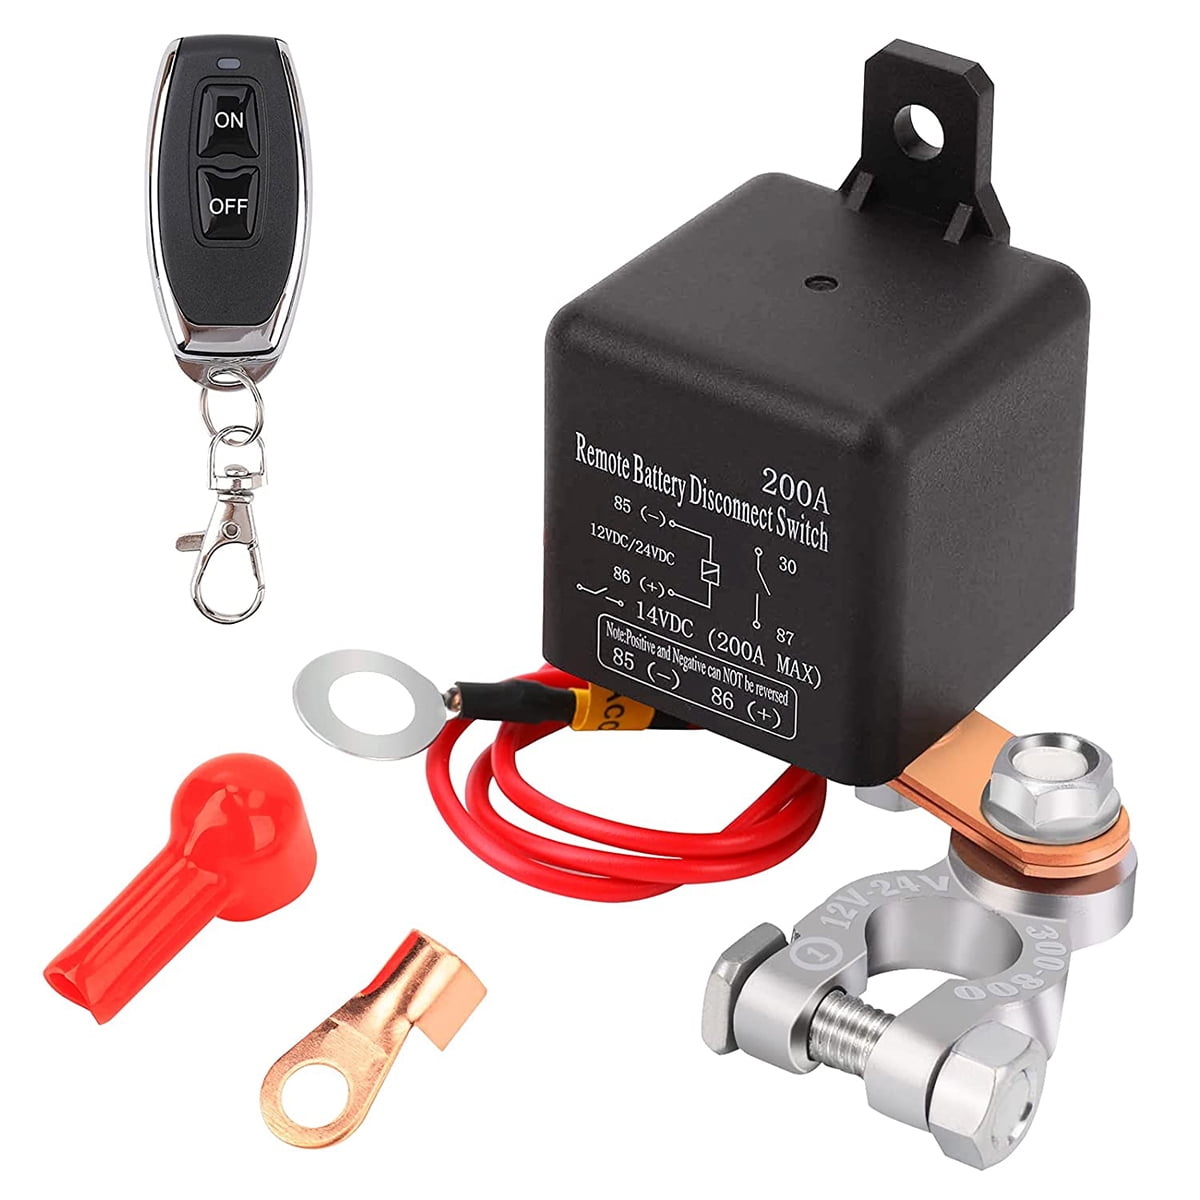 Remote Battery Disconnect Switch, Remote Switch For Truck Car